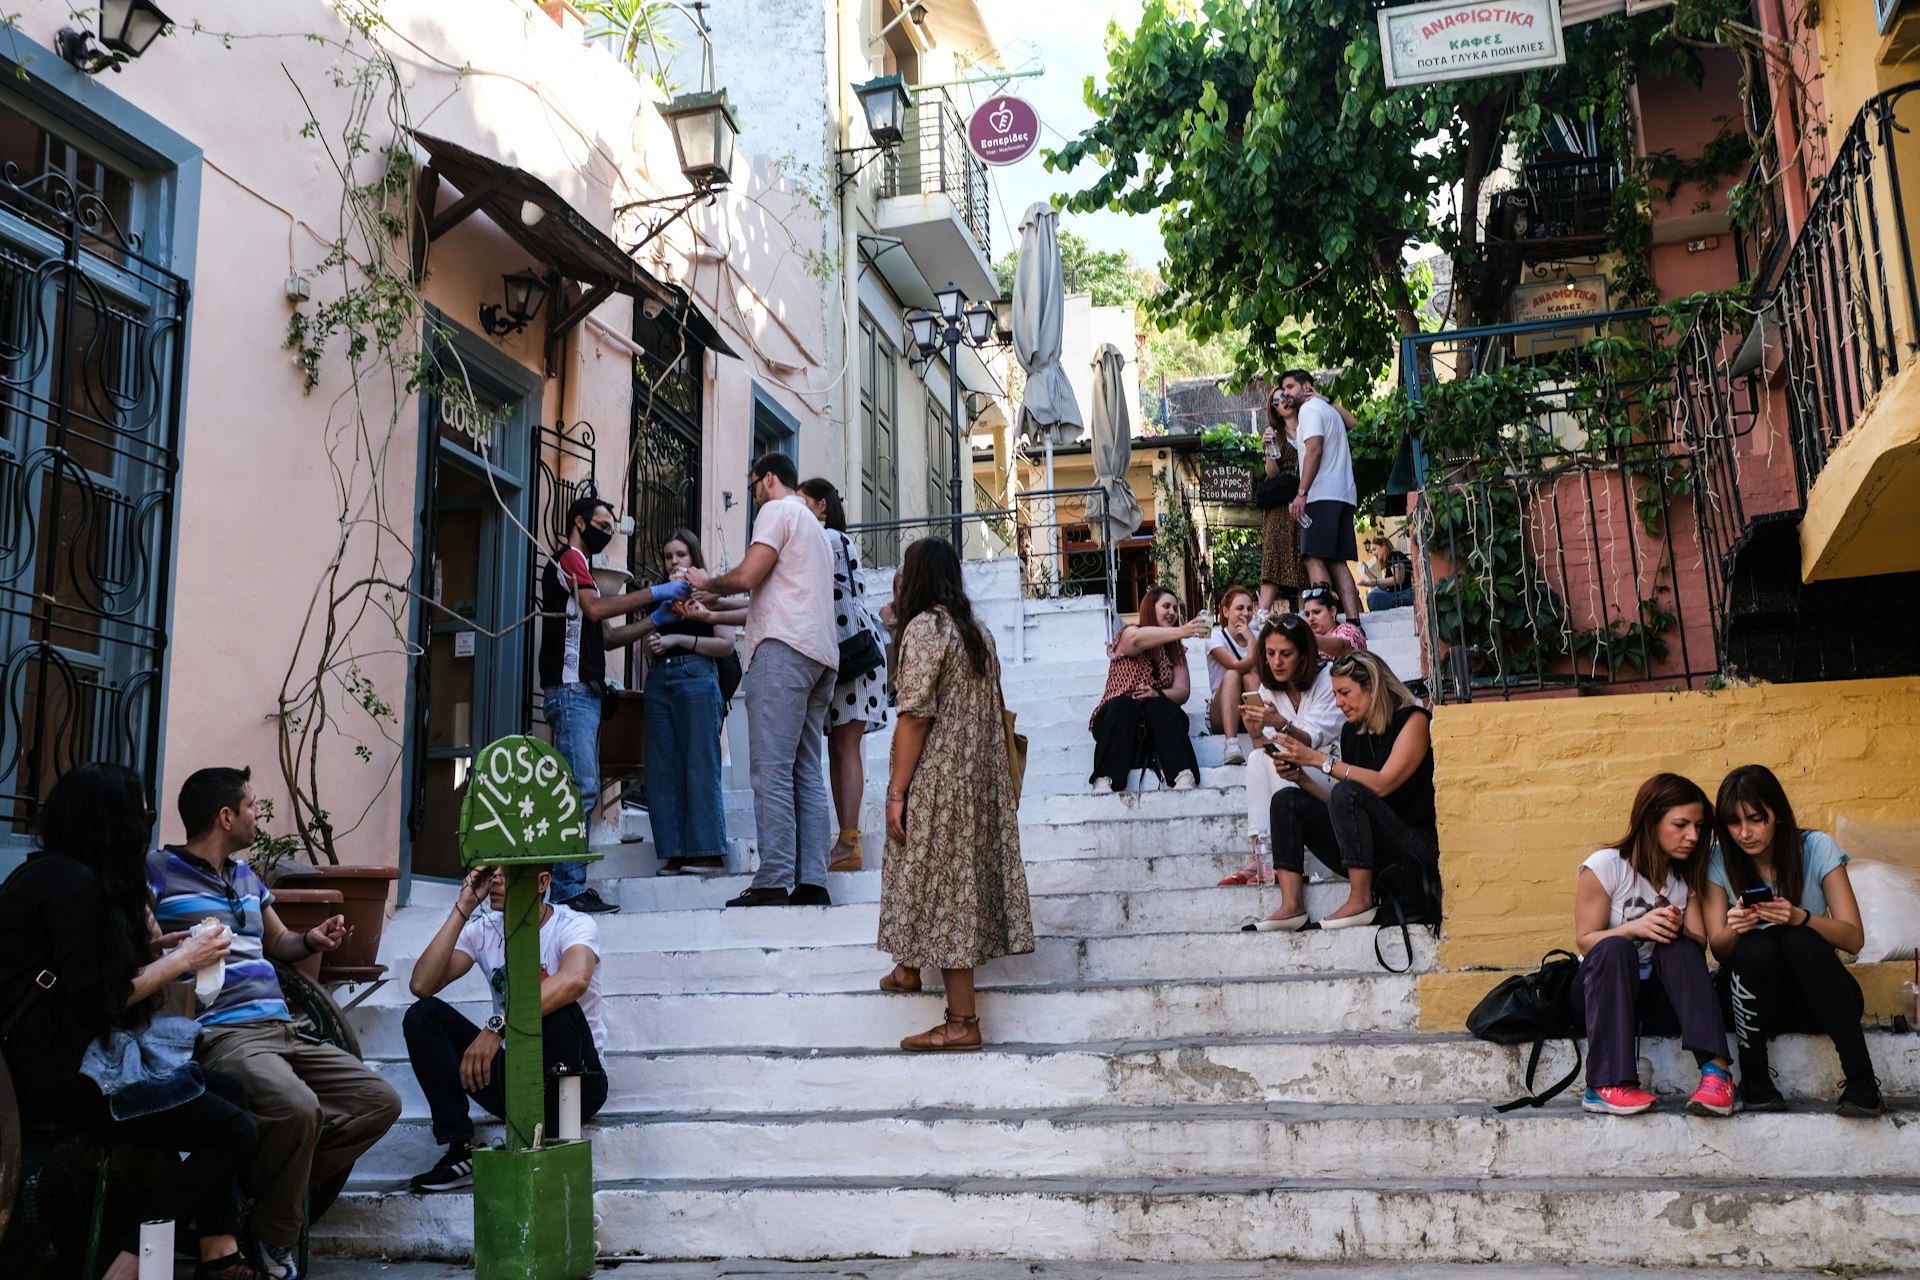 Athenians sit on steps sipping coffee in the sunshine